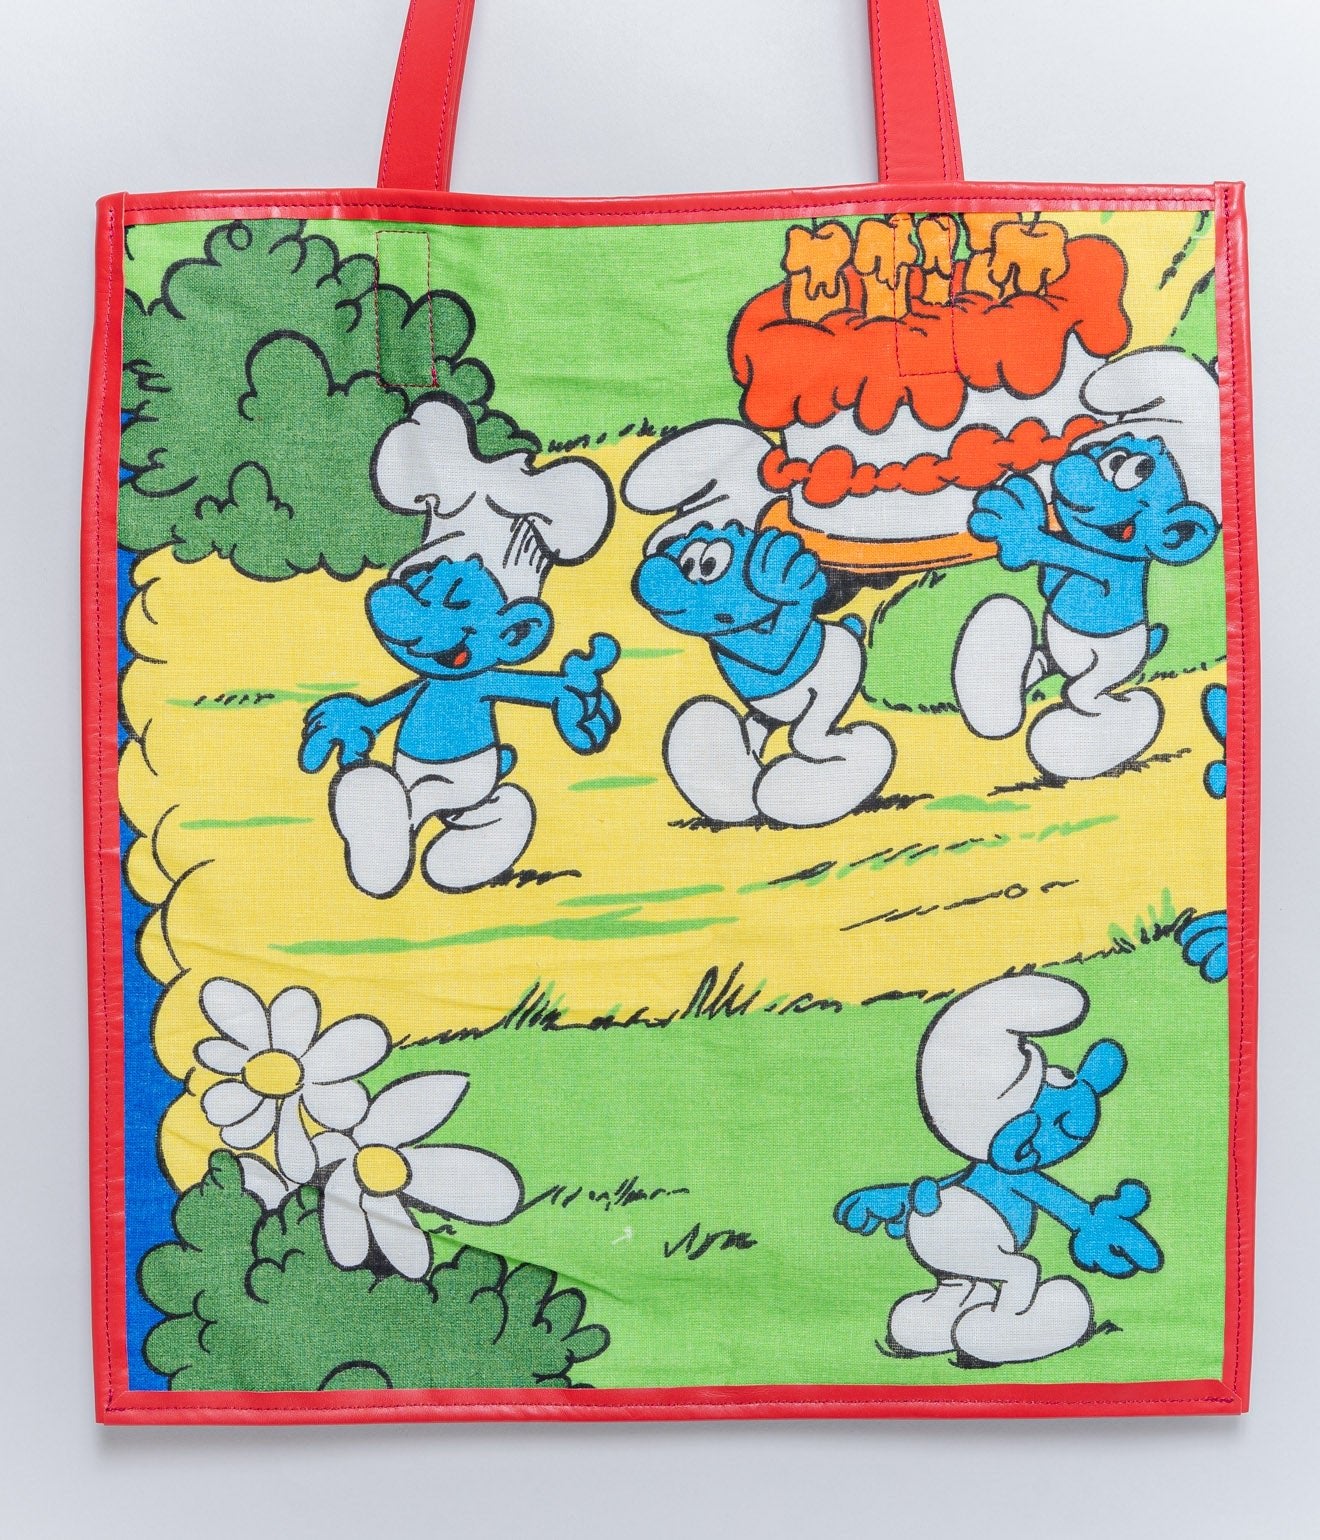 WEAREALLANIMALS UPCYCLE ”Piping Flat Tote -Vintage Smurf Fabric-" #7 - WEAREALLANIMALS